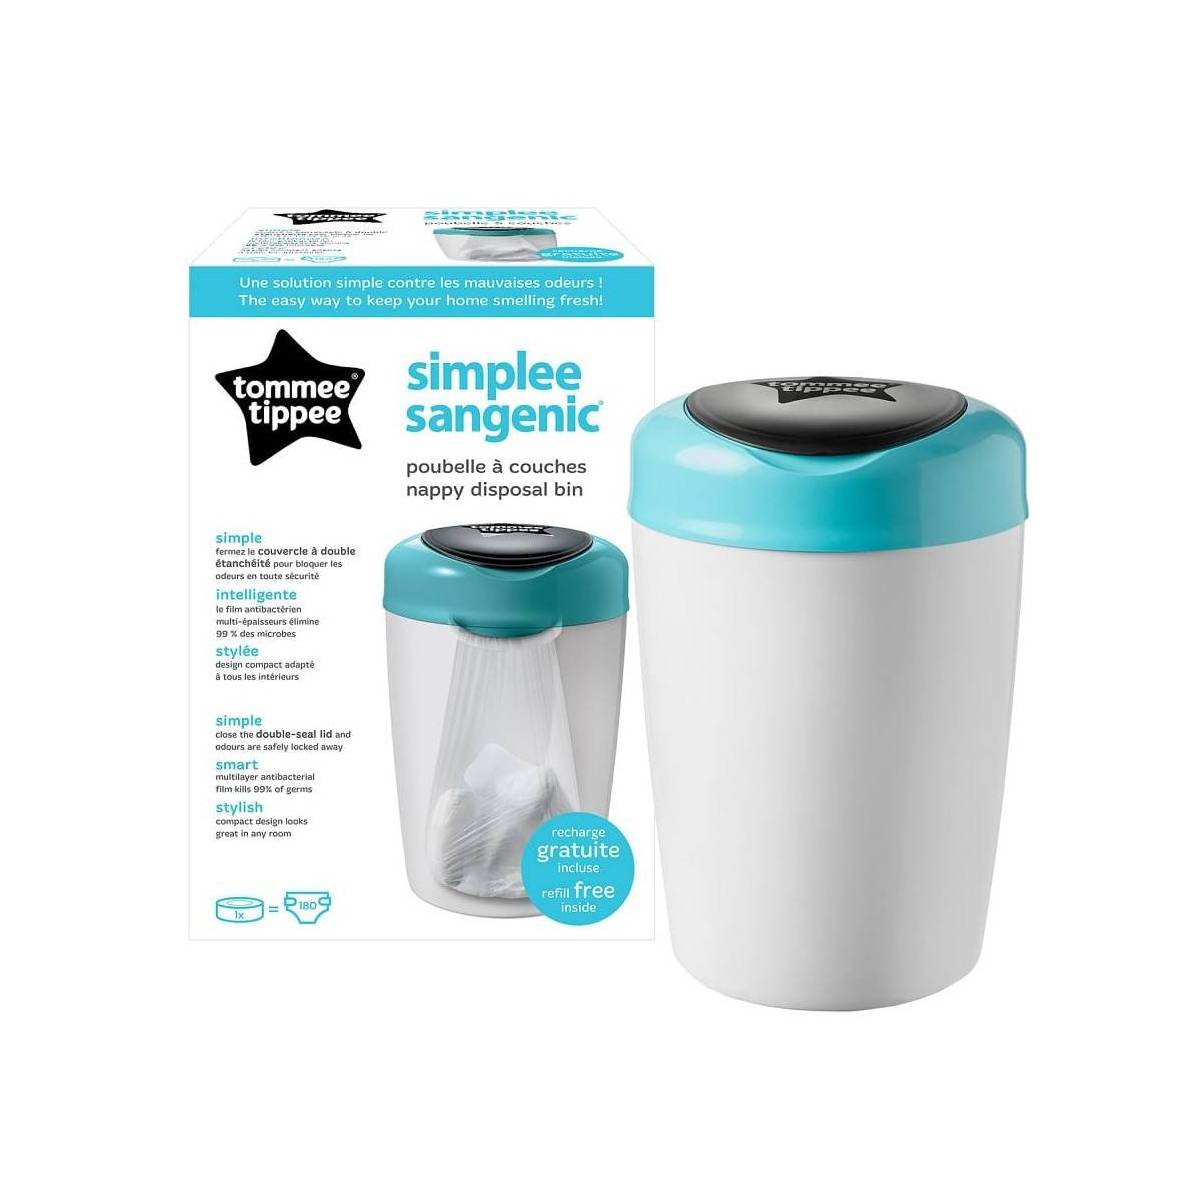 TOMMEE TIPPEE TOMMEE TIPPEE Twist and Click Poubelle a Couches de